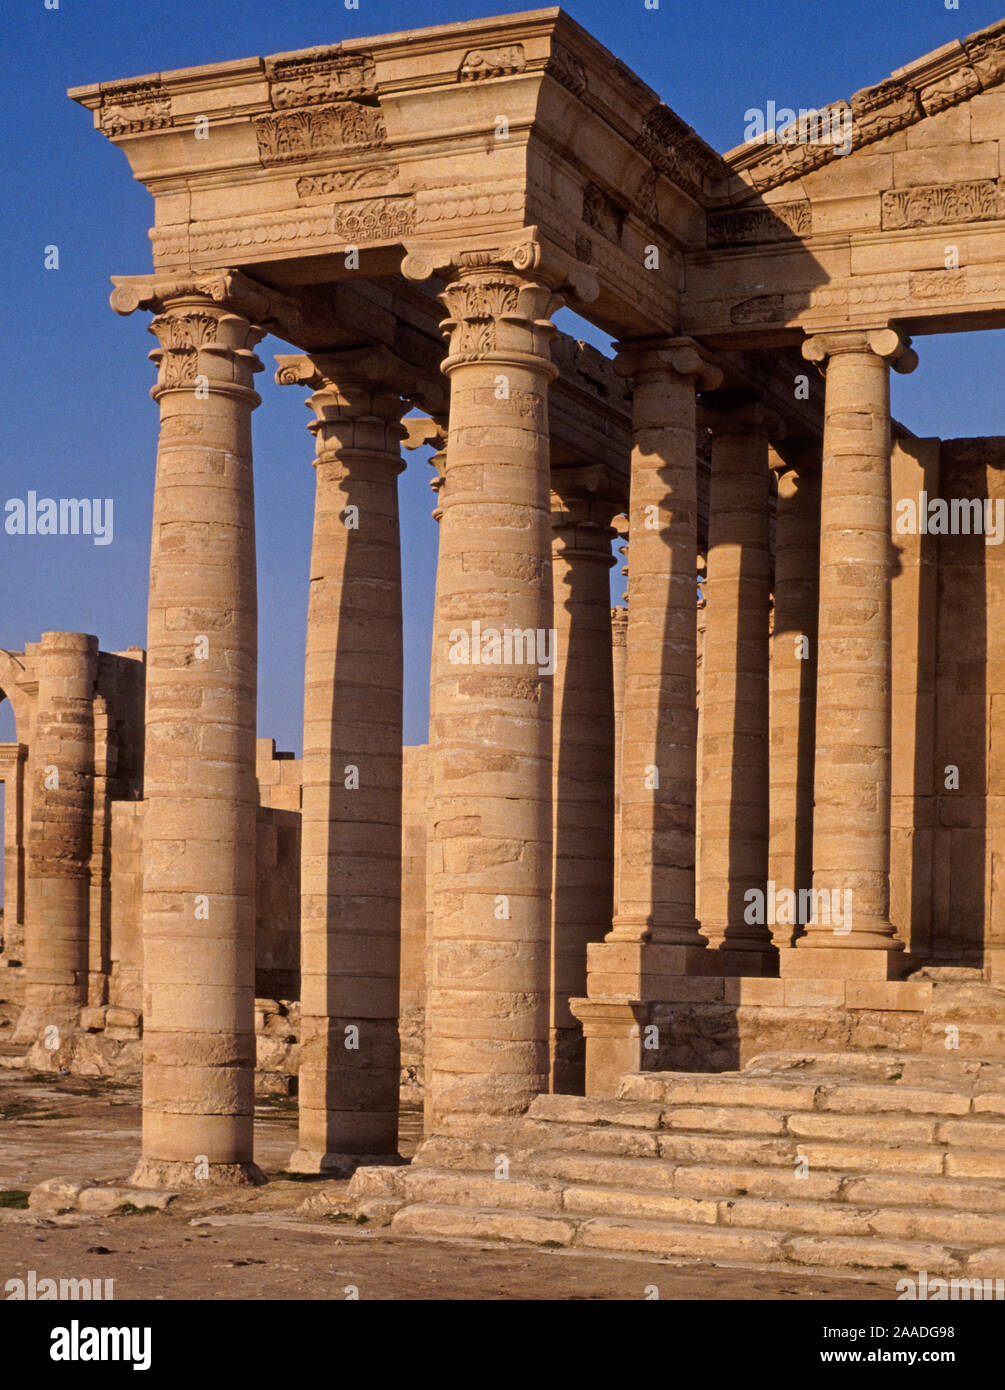 Ancient Assyria: the temple at Hatra (al-Hadr) northern Iraq, 2nd Century BC. Iraq. In 2014 Hatra was taken over by Islamic State militants and much of the site was destroyed in 2015. Stock Photo